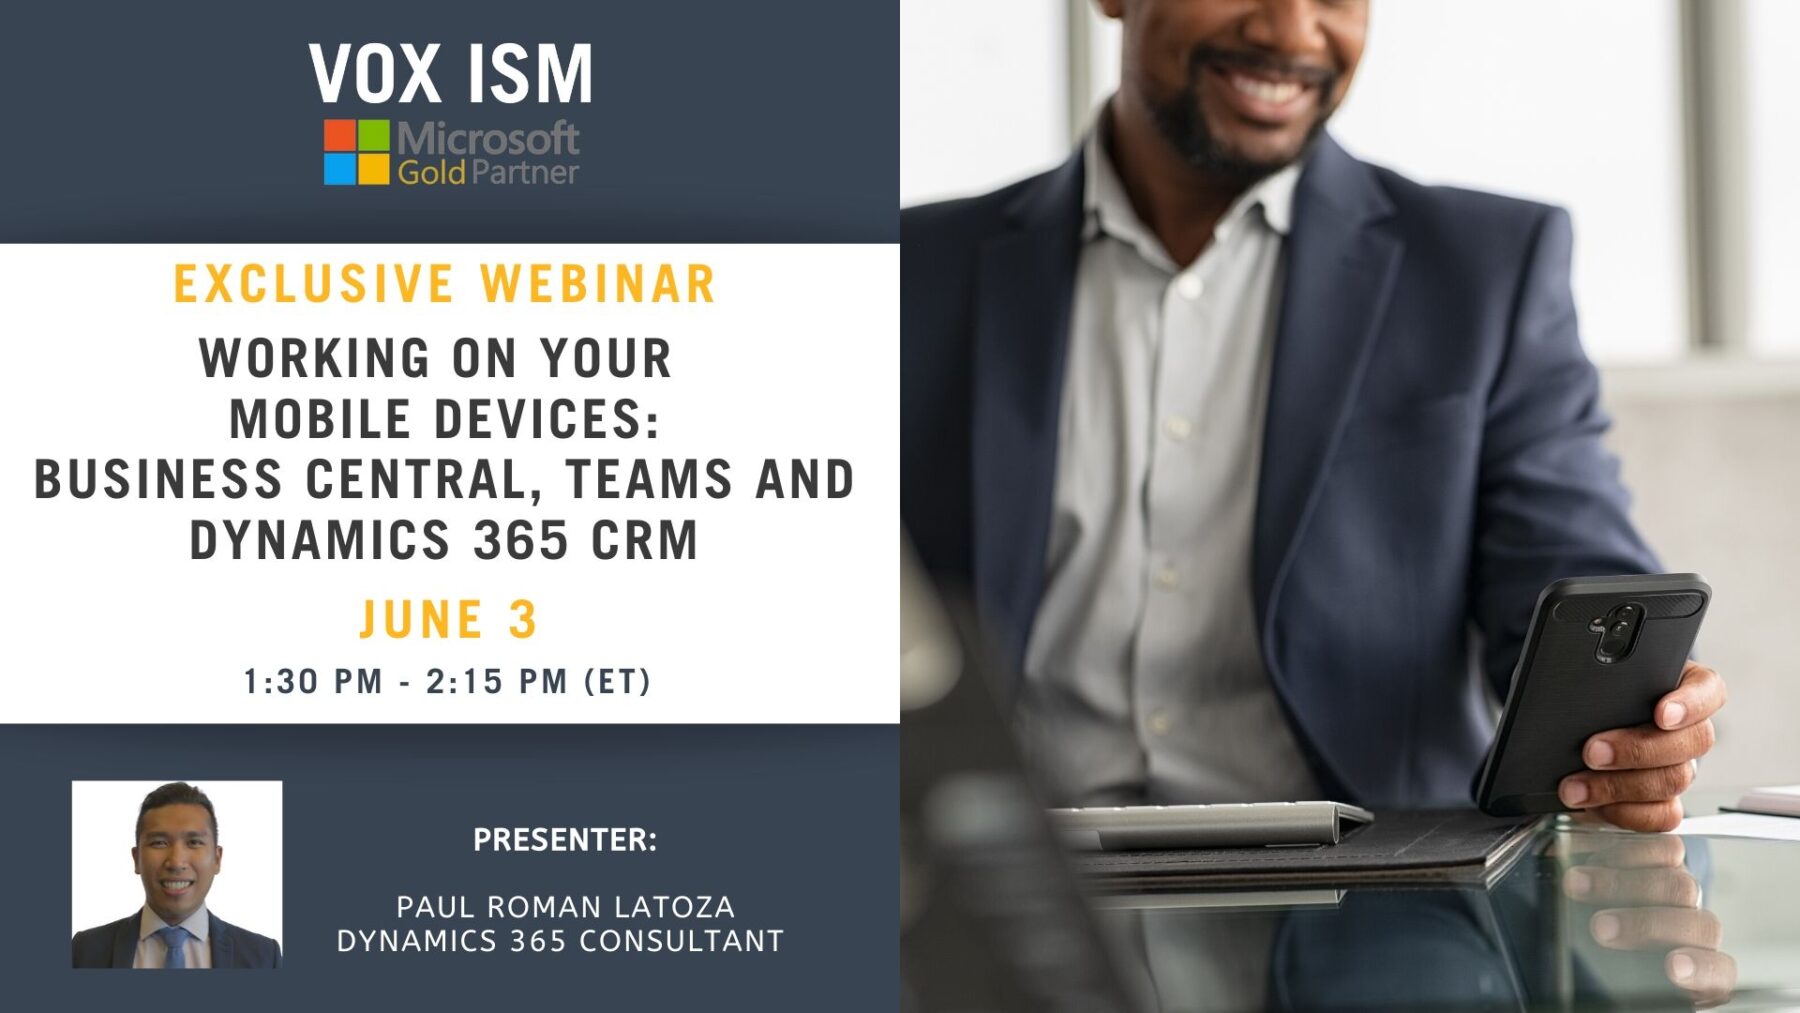 Working on your Mobile devices (Business Central, Teams, CRM) - June 3 - Webinar VOX ISM